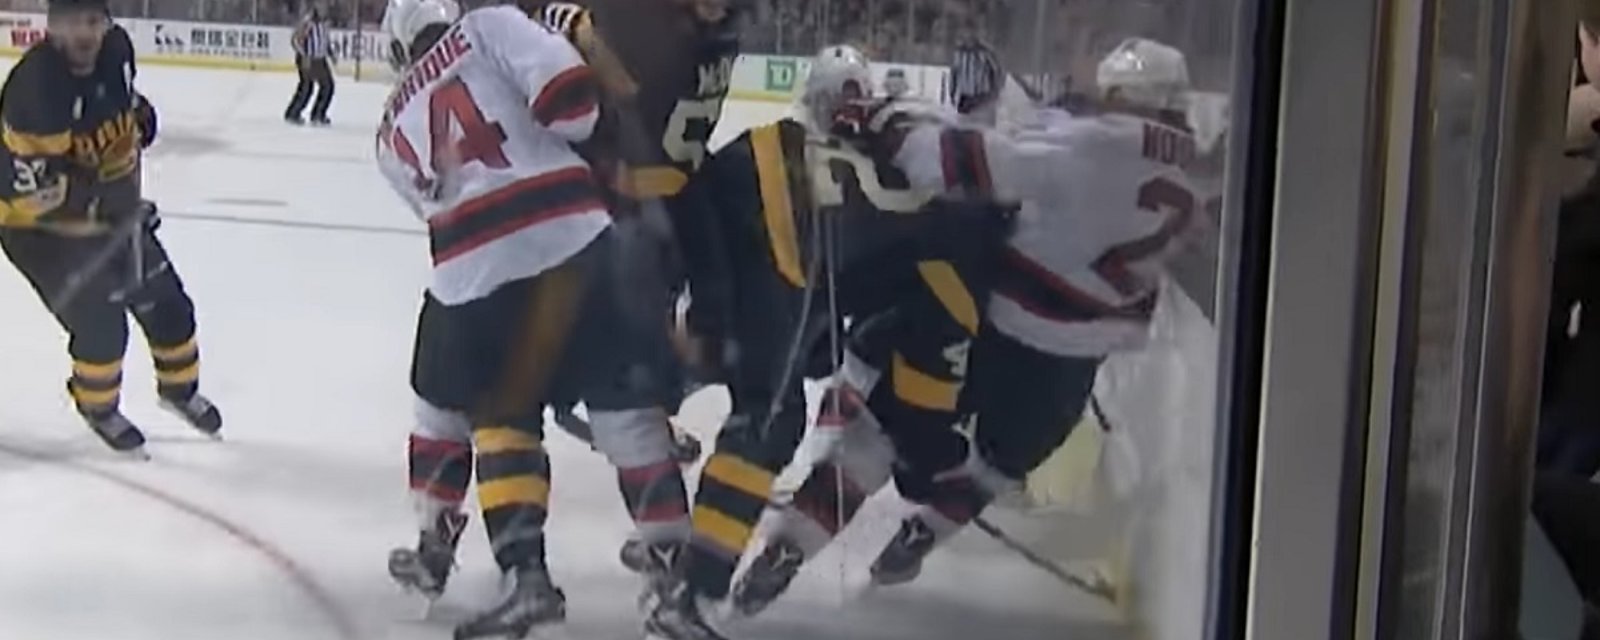 Watch: McQuaid finishes his shift after skate blade cuts his neck.